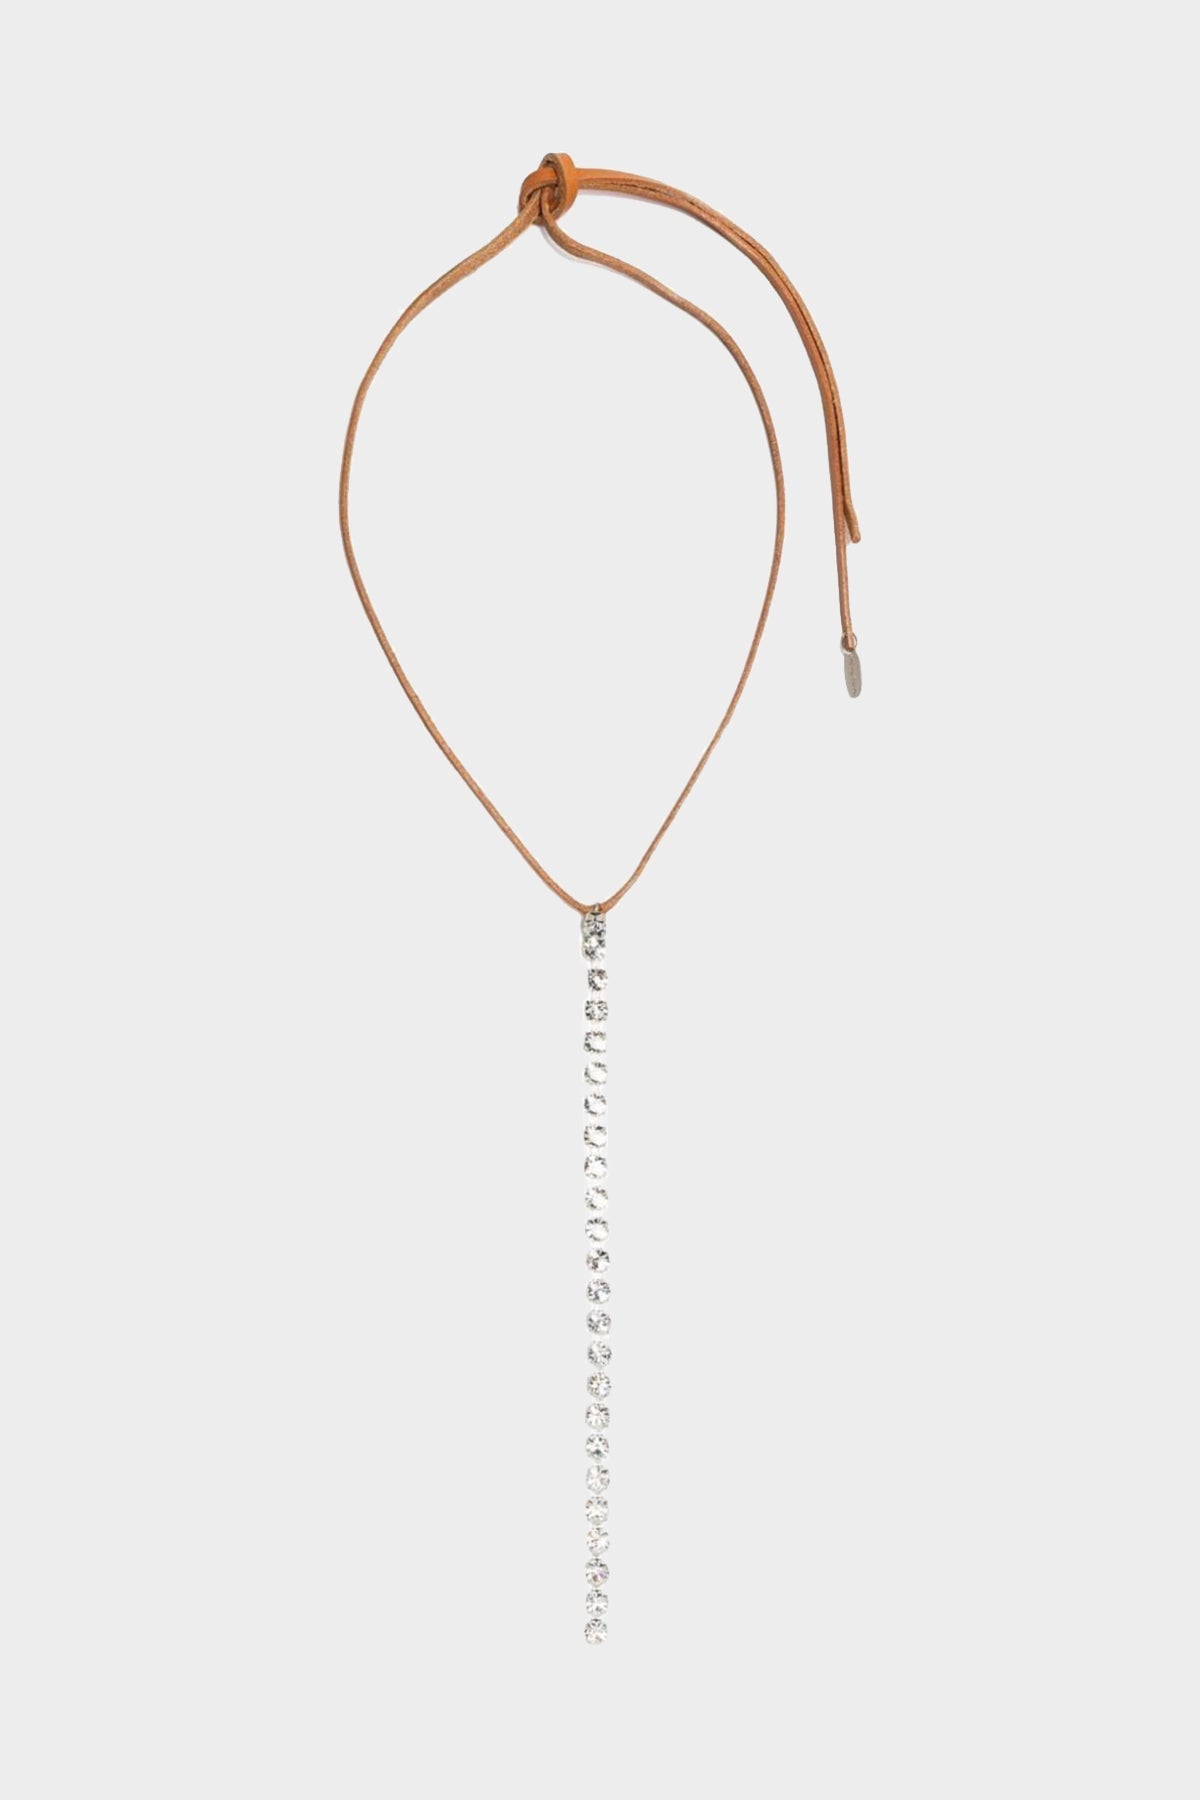 Leather Necklace with Crystal Pendent - shop-olivia.com